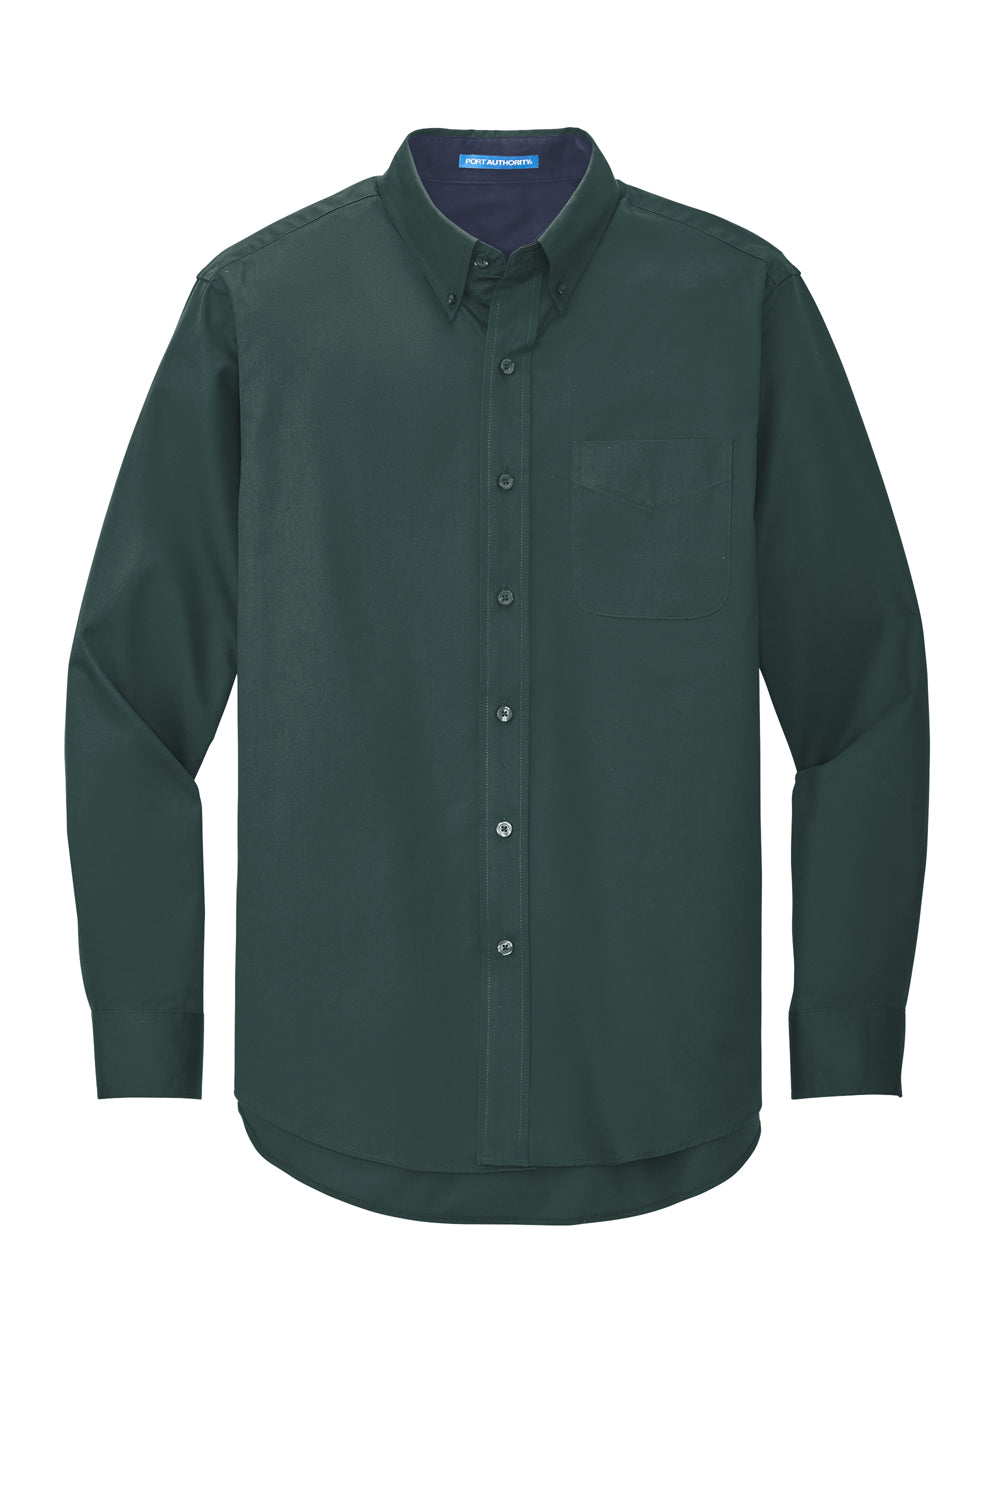 Port Authority S608/TLS608/S608ES Mens Easy Care Wrinkle Resistant Long Sleeve Button Down Shirt w/ Pocket Dark Green Flat Front